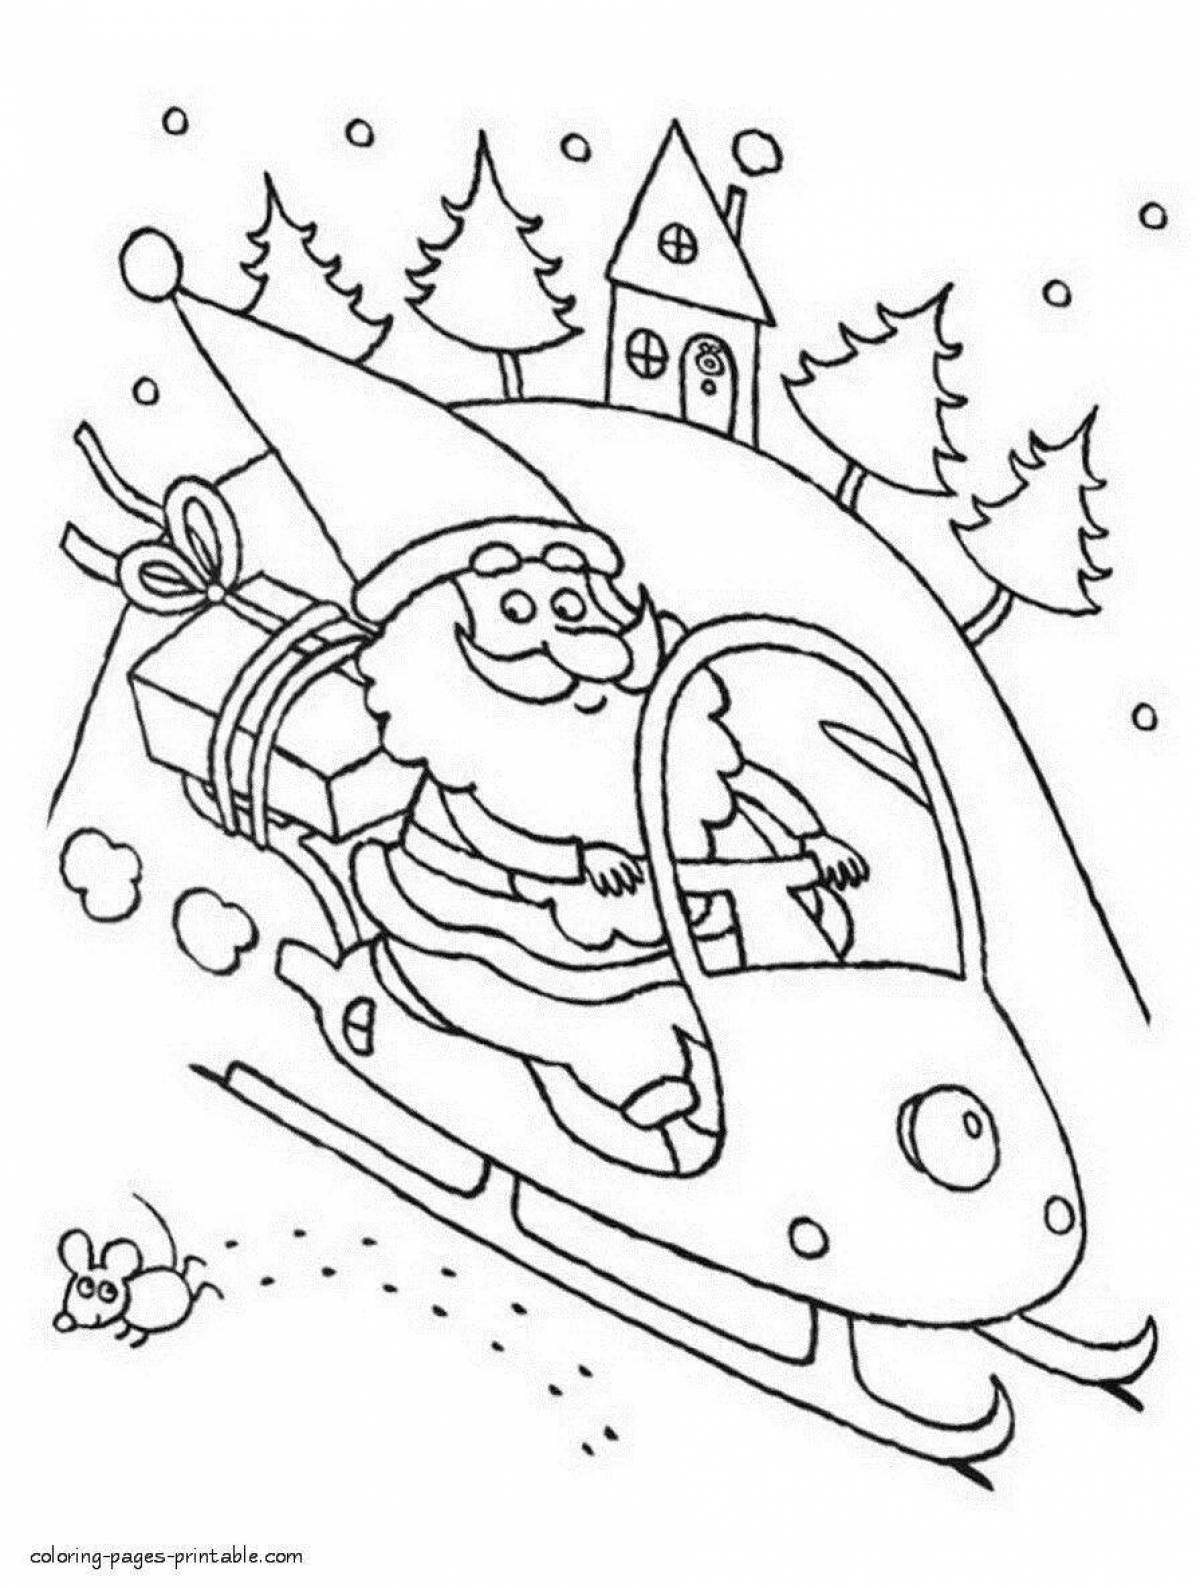 Fun coloring book for kids with snowmobiles